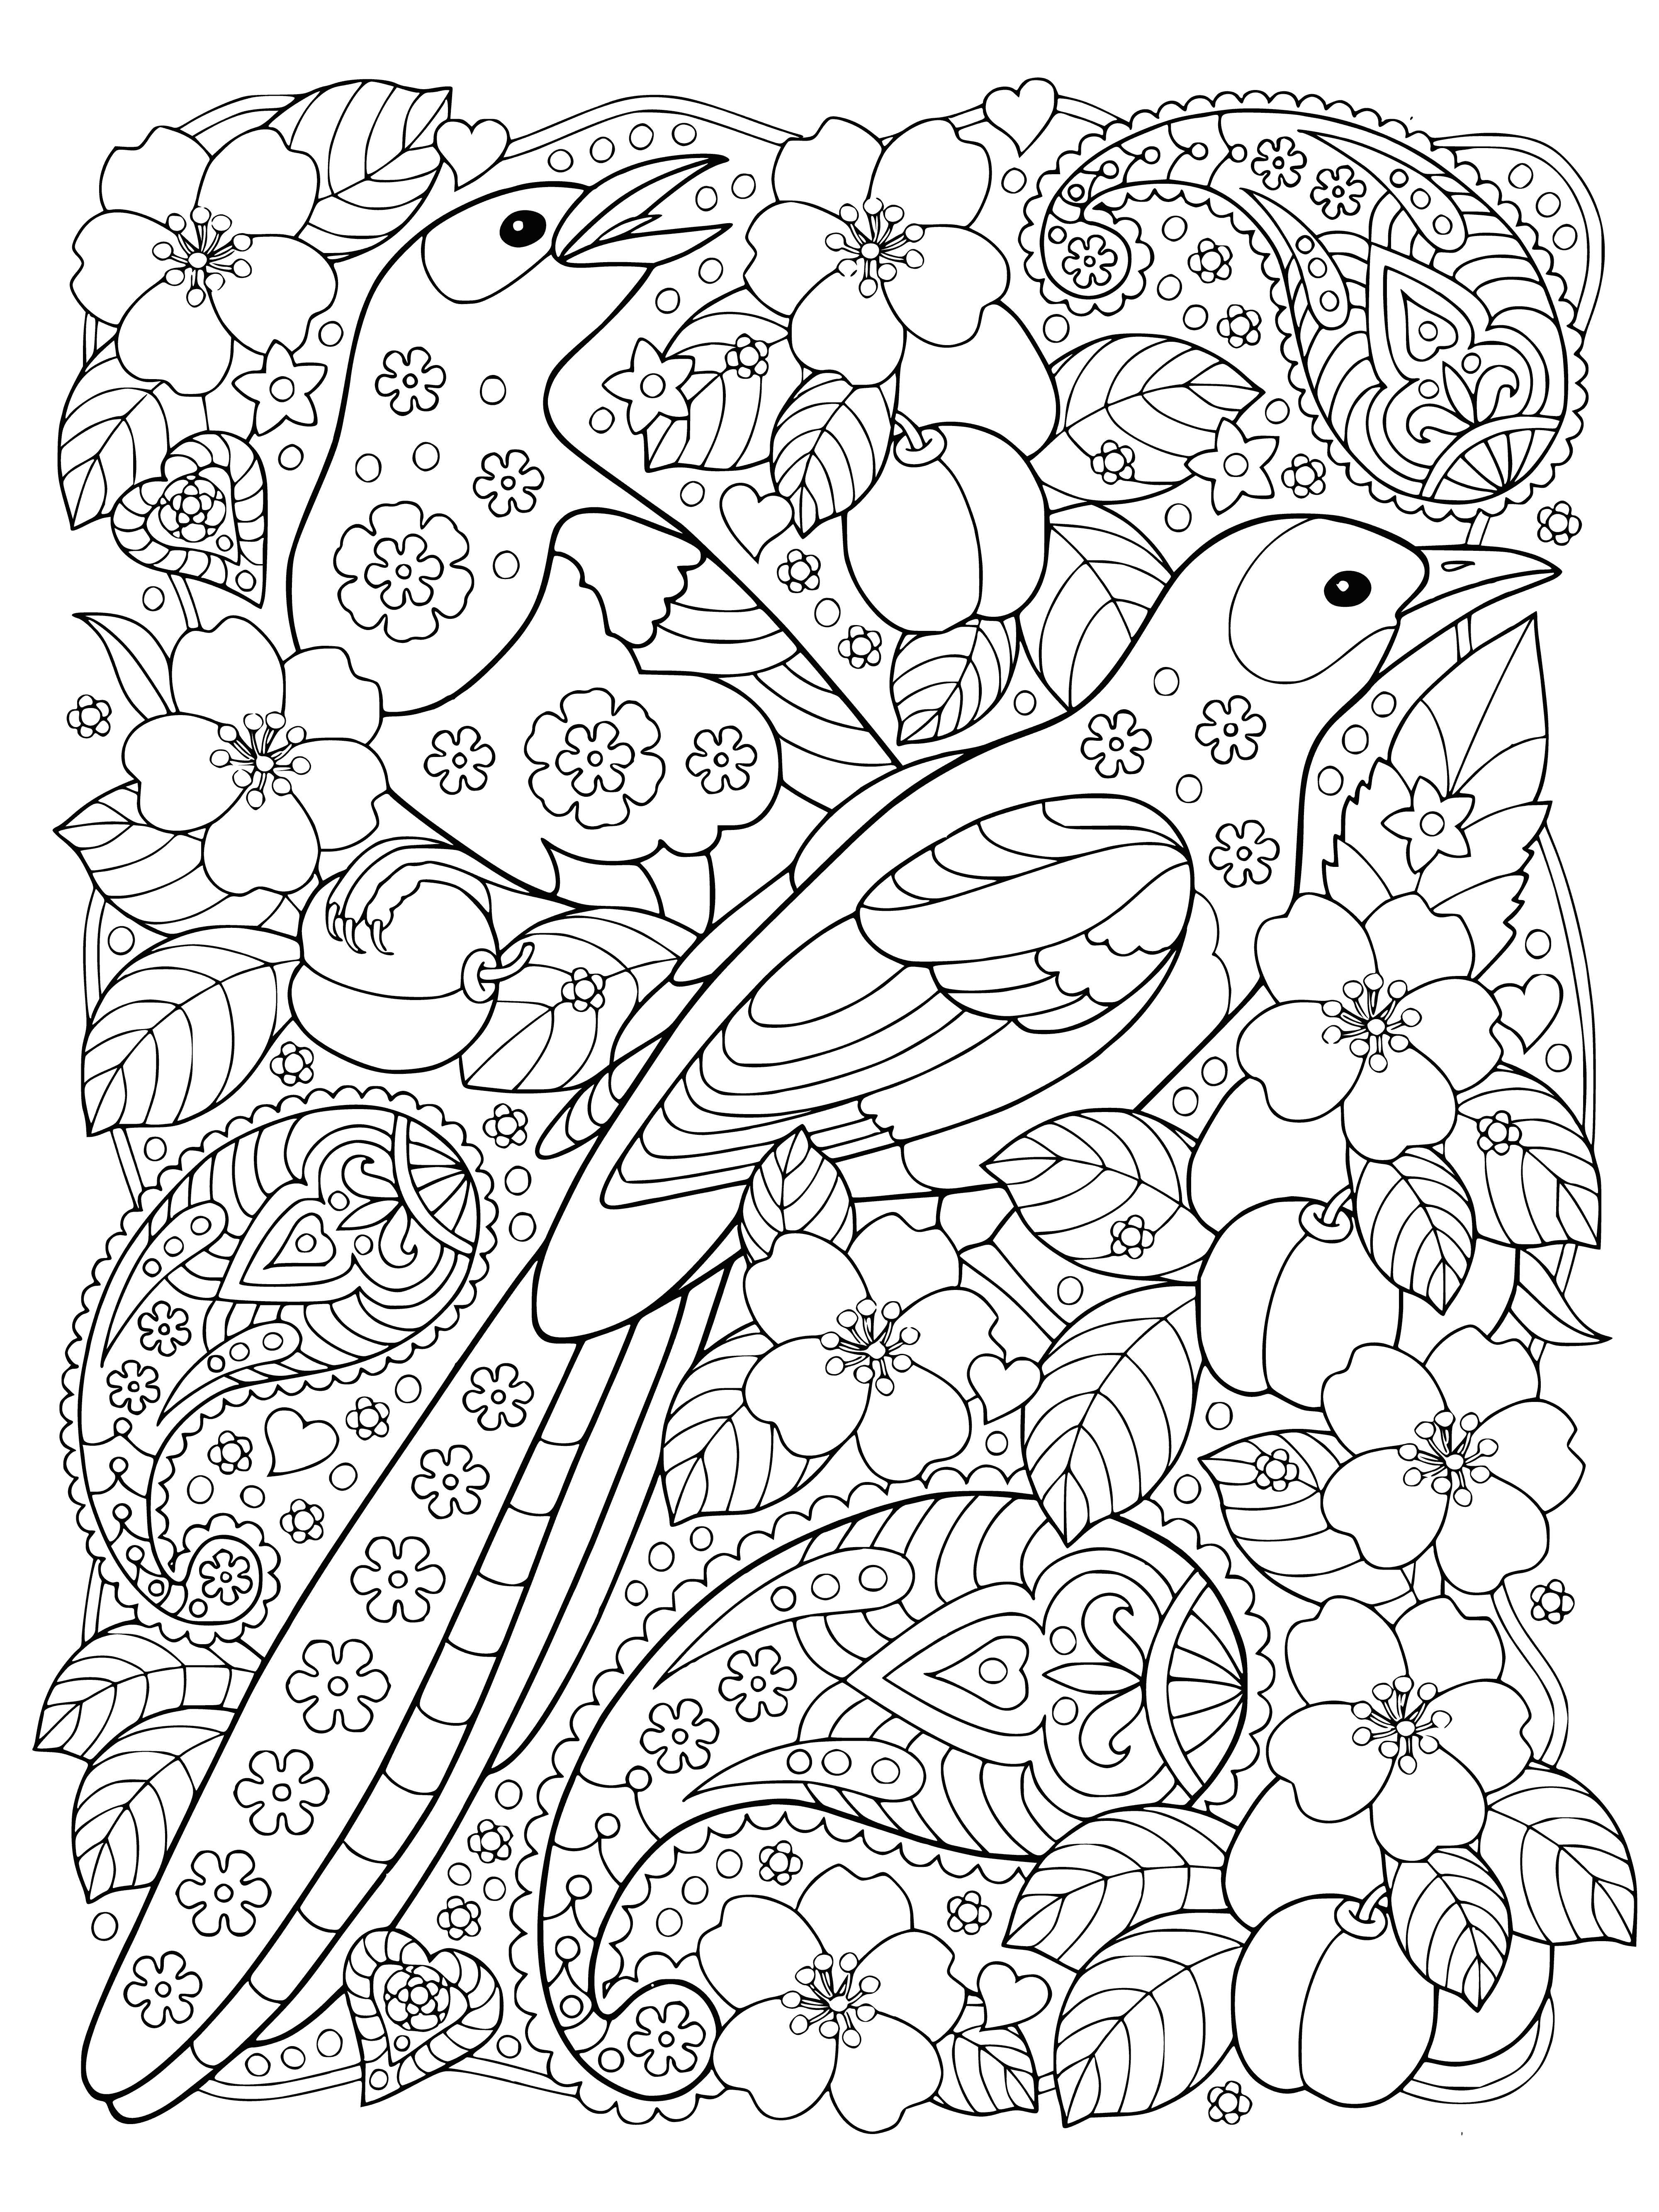 Birds with flowers coloring page